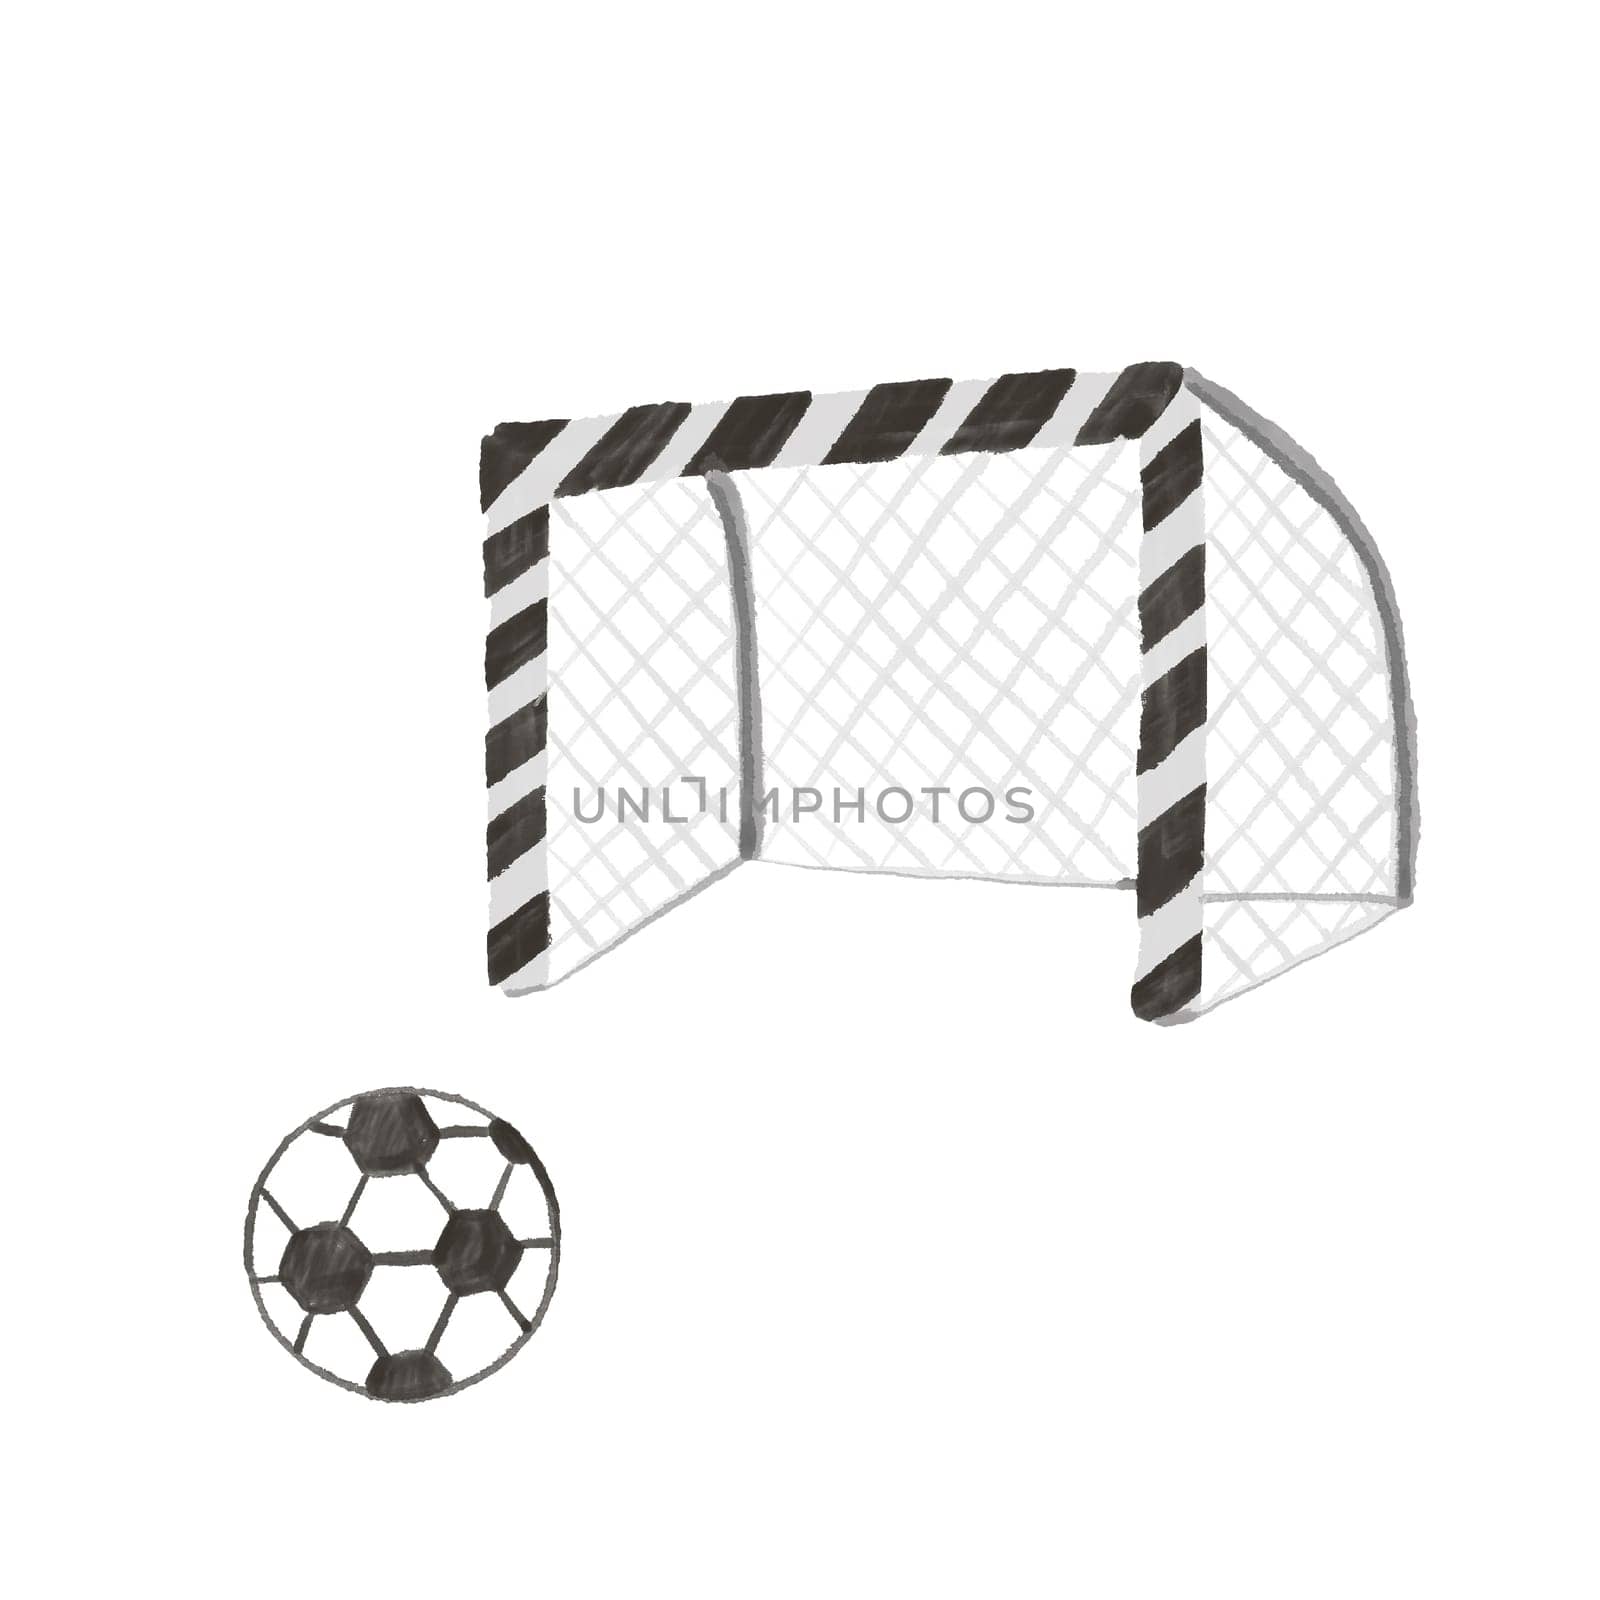 Soccer goal and ball. Football Graphic illustration isolated on white by ElenaPlatova